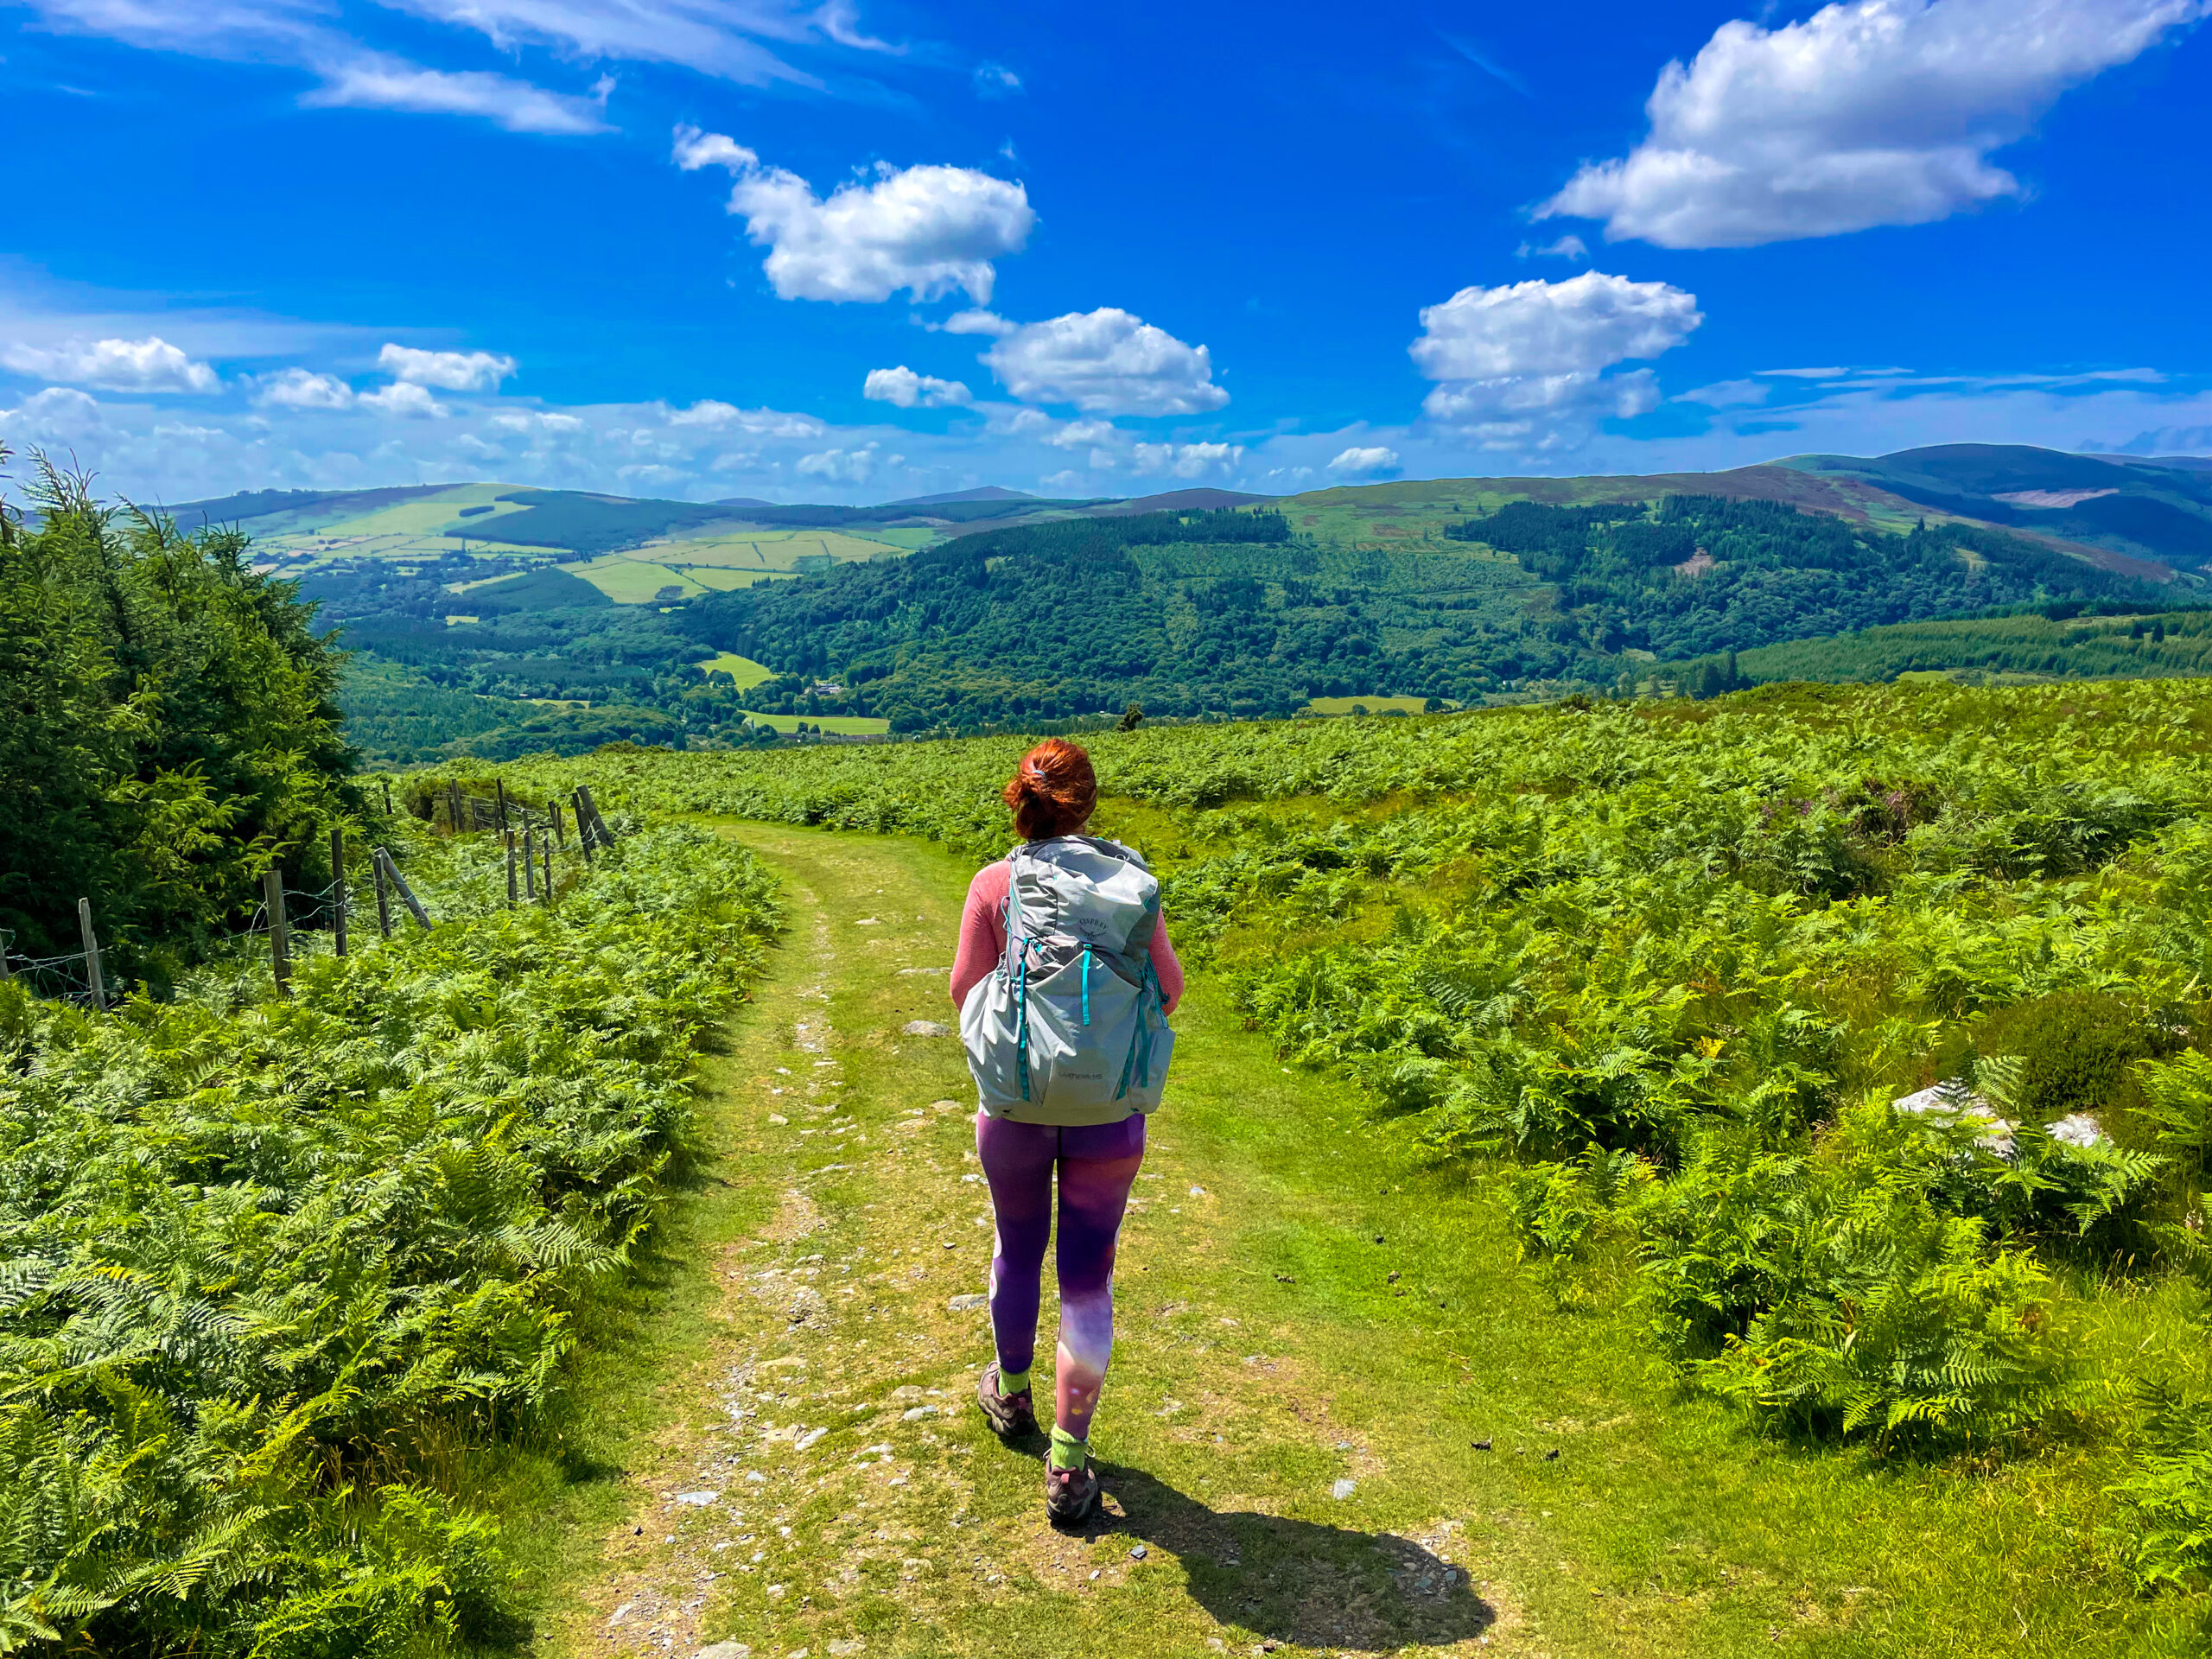 A sunny scene of Lauren walking the Wicklow Way through a sea of ferns, with hills and mountains stretching off into the distance. She's wearing vibrant leggings and carrying a full backpack.